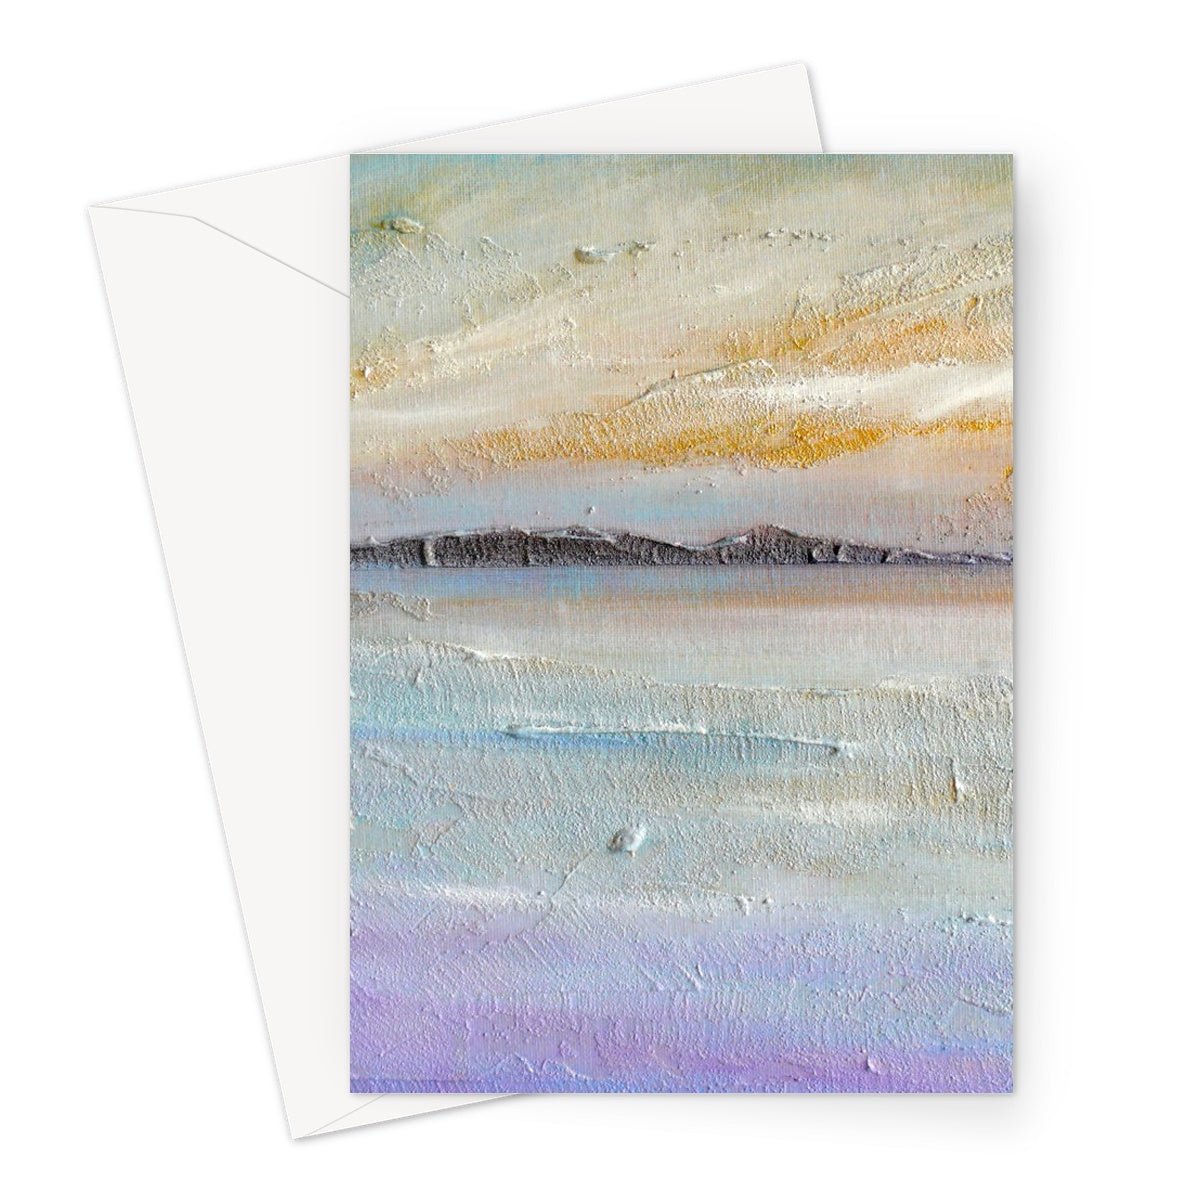 Sollas Beach North Uist Art Gifts Greeting Card-Greetings Cards-Hebridean Islands Art Gallery-A5 Portrait-10 Cards-Paintings, Prints, Homeware, Art Gifts From Scotland By Scottish Artist Kevin Hunter